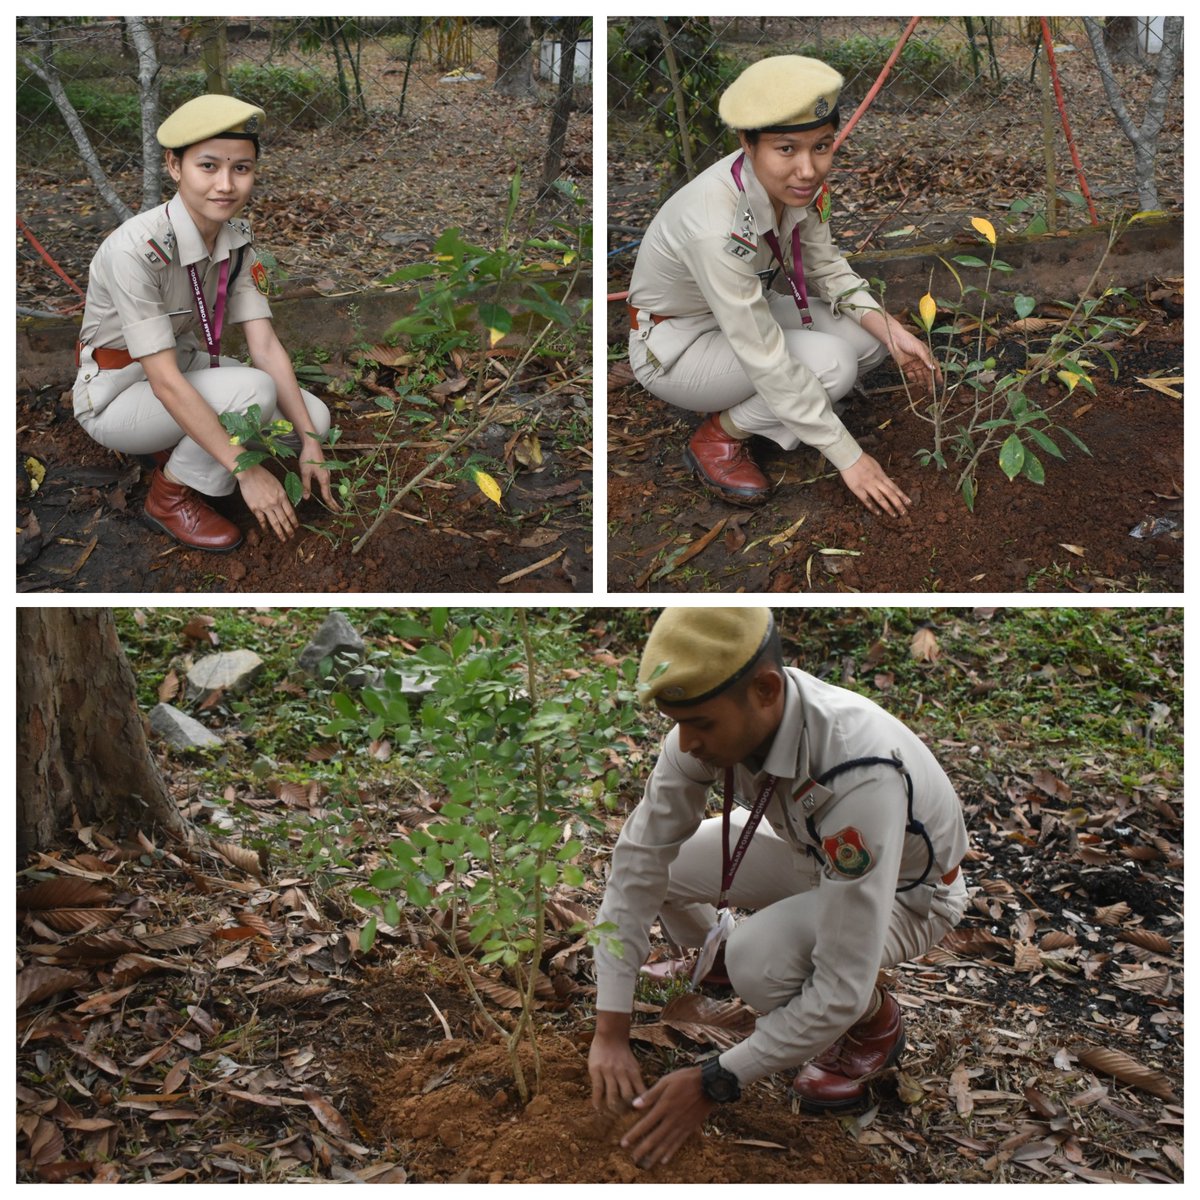 On the International Day of Forests: 2024, Assam Forest School planted fragrant flower saplings on either side of its entrance amidst the first rains of the year. Saplings credit to Guwahati SF Division. @cmpatowary @assamforest